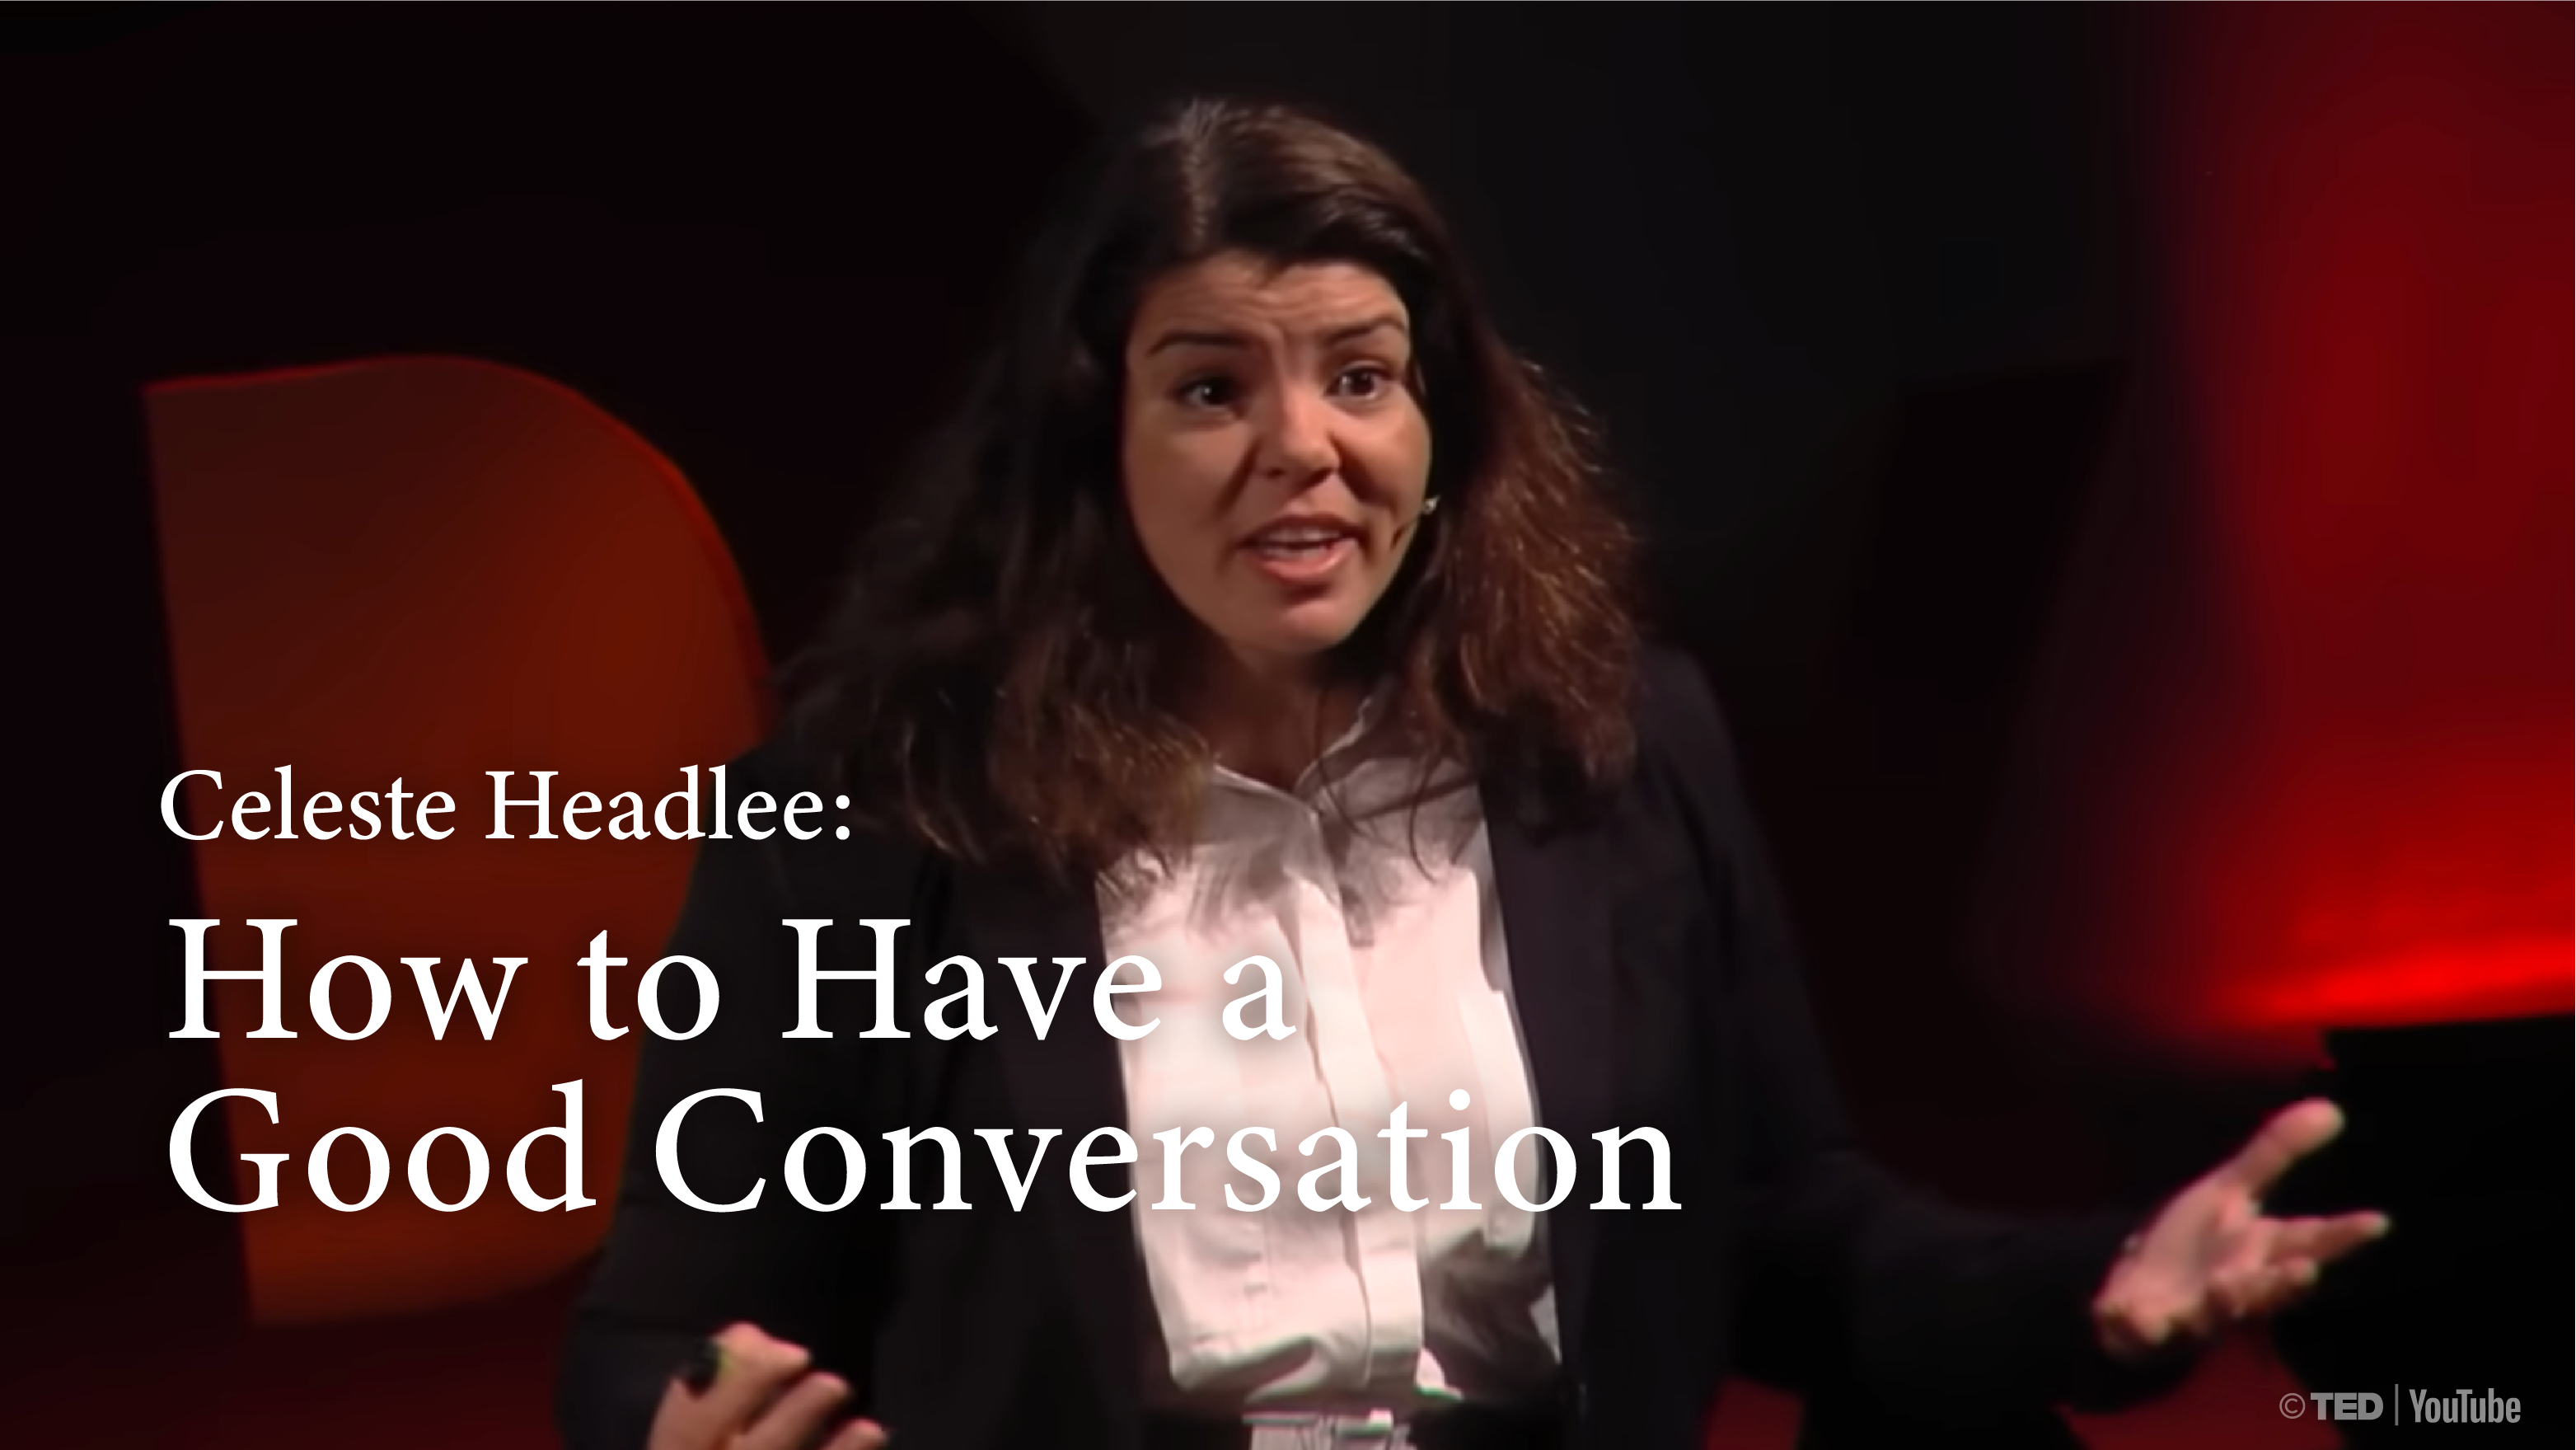 [B+] How to Have a Good Conversation | Celeste Headlee [FULL]